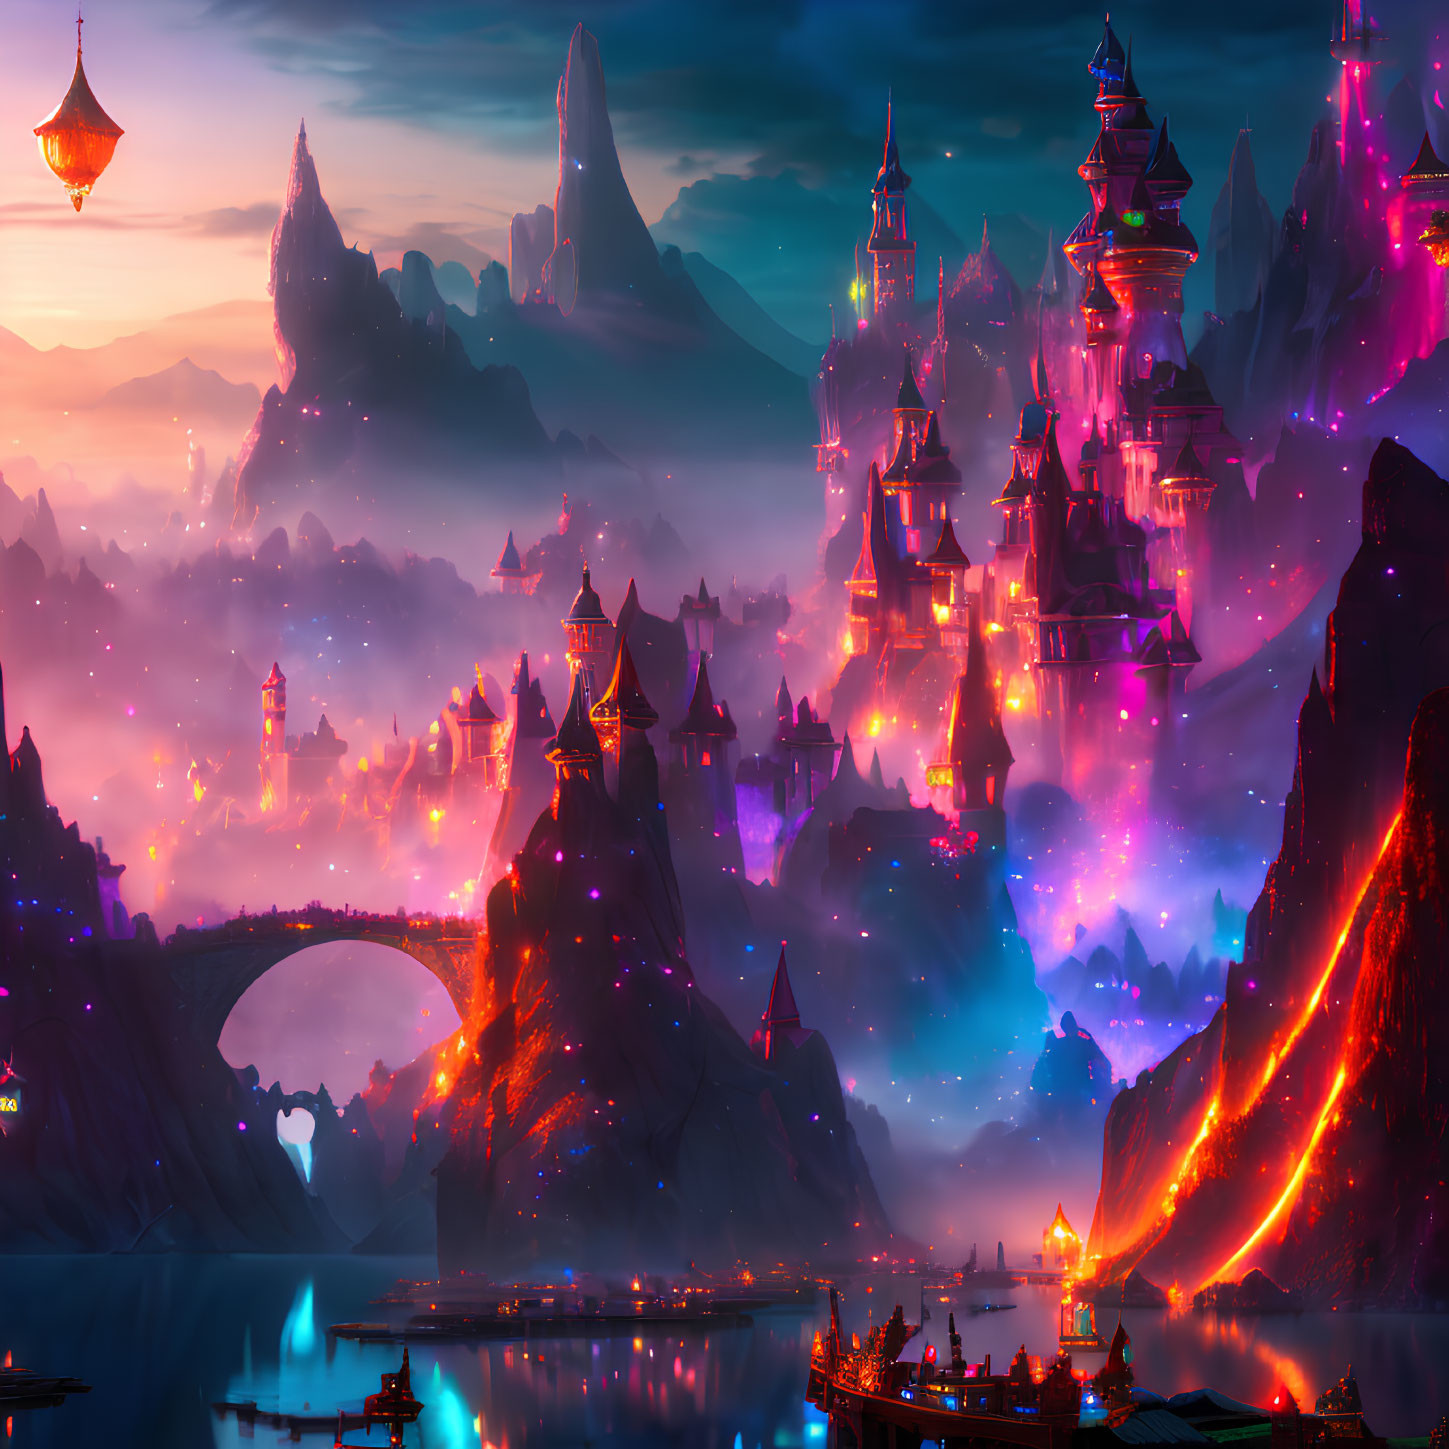 Fantasy landscape with neon lights, castles, floating islands, airships, and misty river